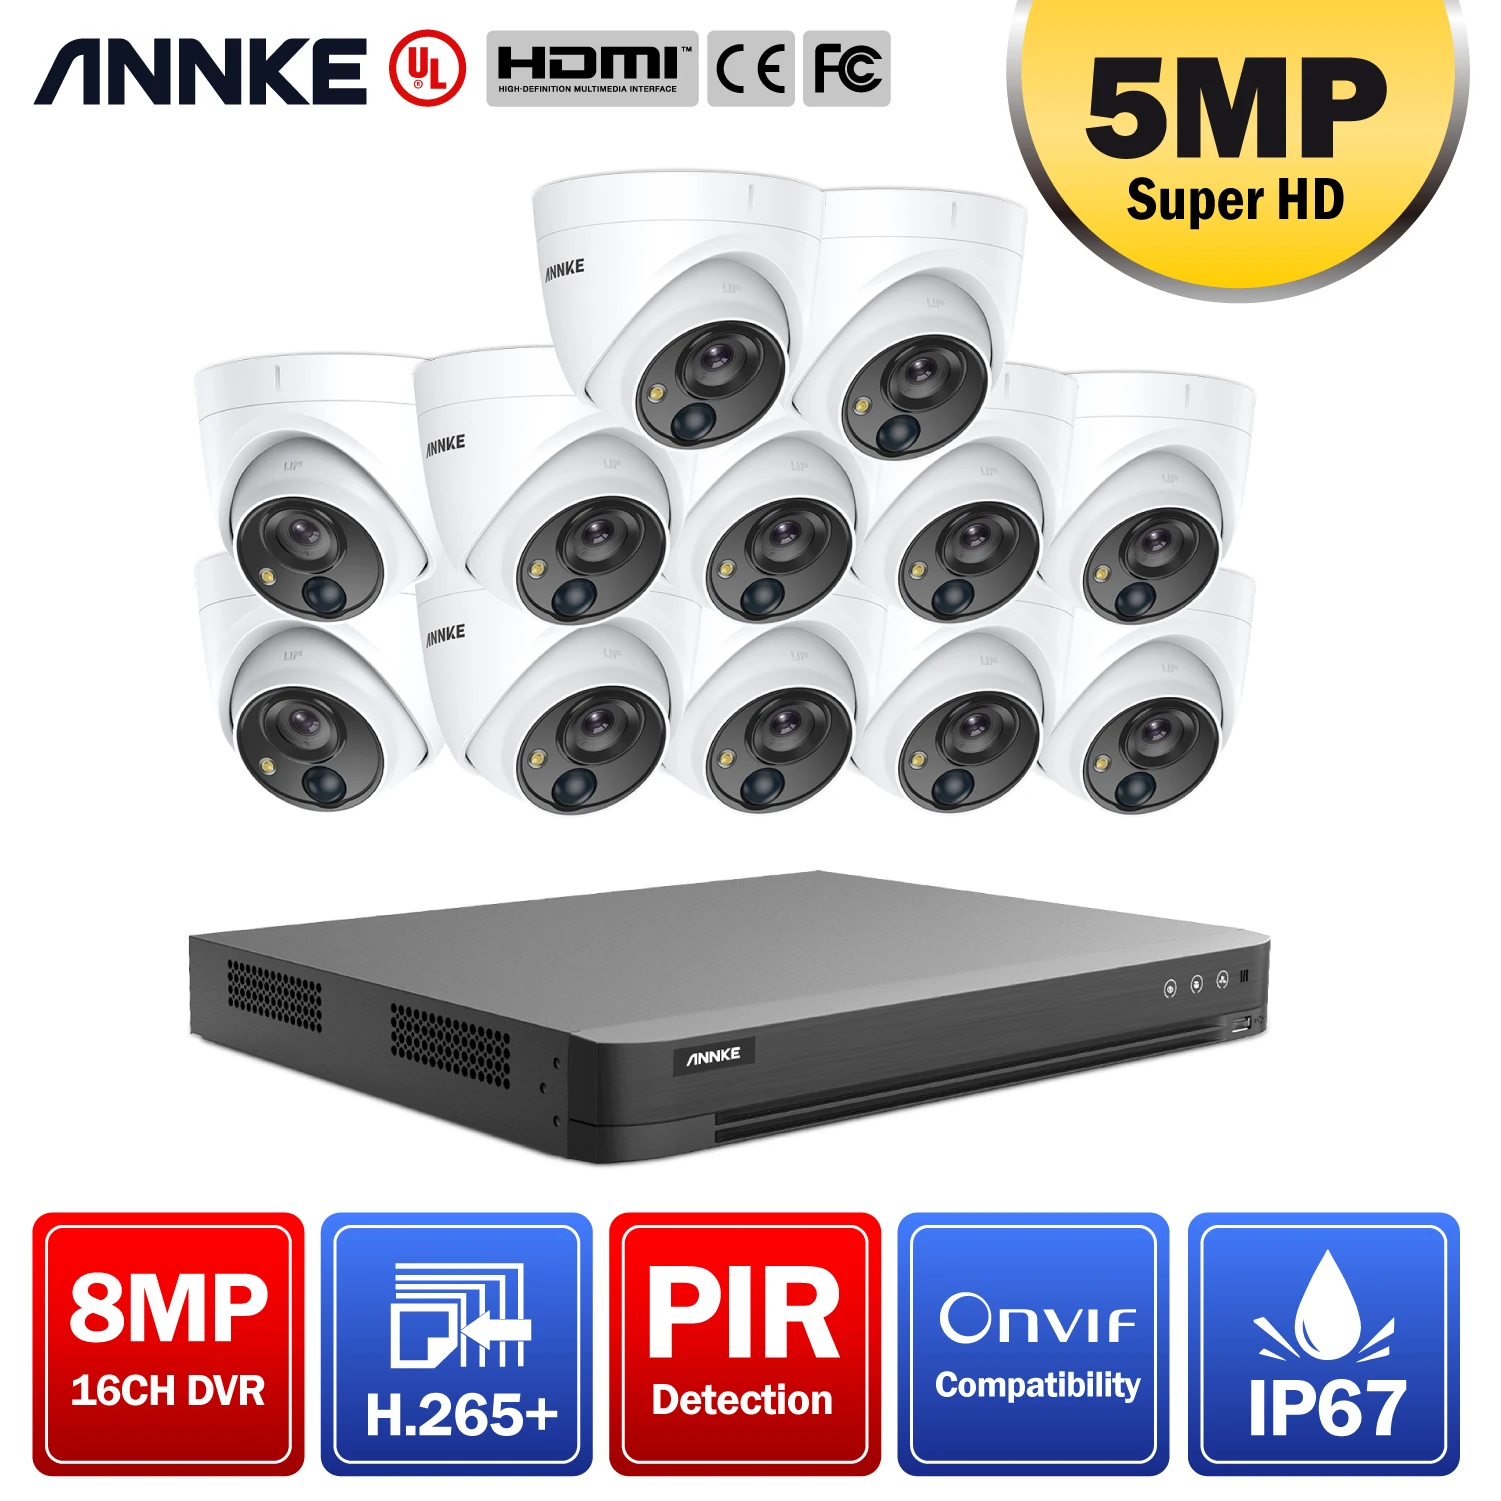 

ANNKE 16CH 5MP Super HD Video Security System H.265+ 8MP DVR With 12PCS 5MP Weatherproof Surveillance Cameras Kits PIR Detection